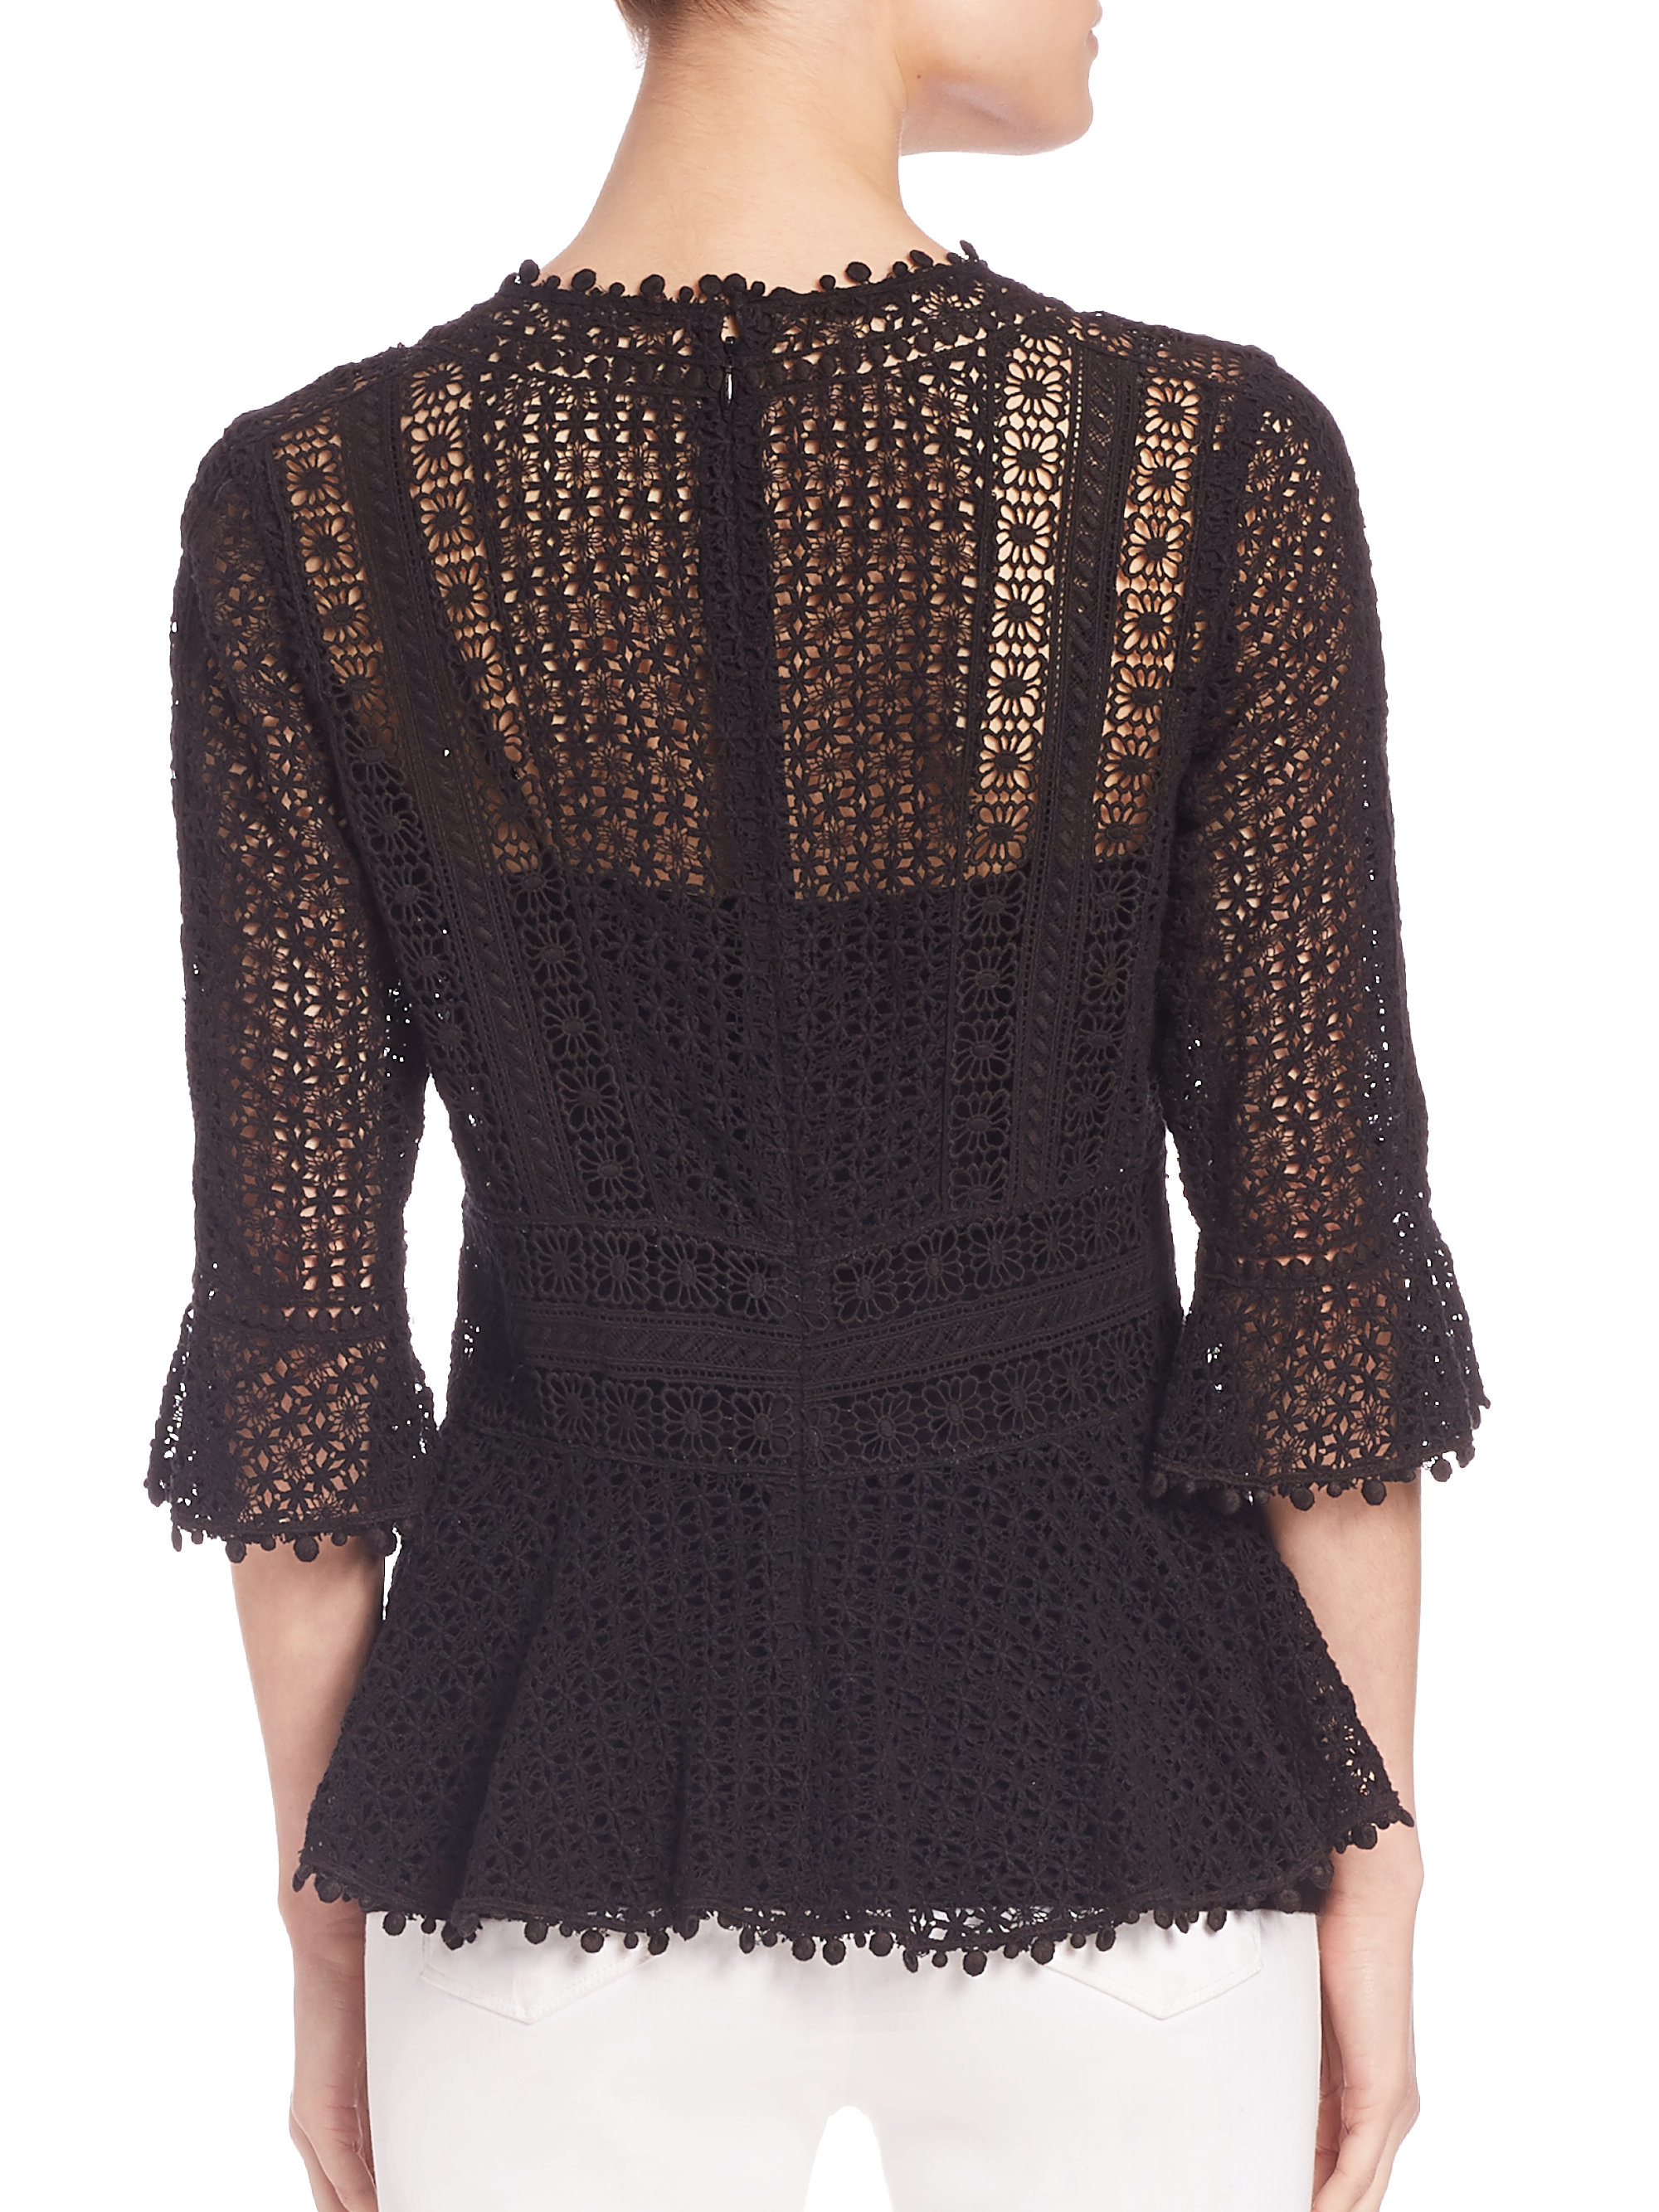 Rebecca Taylor Guipure Lace Top in Black - Lyst